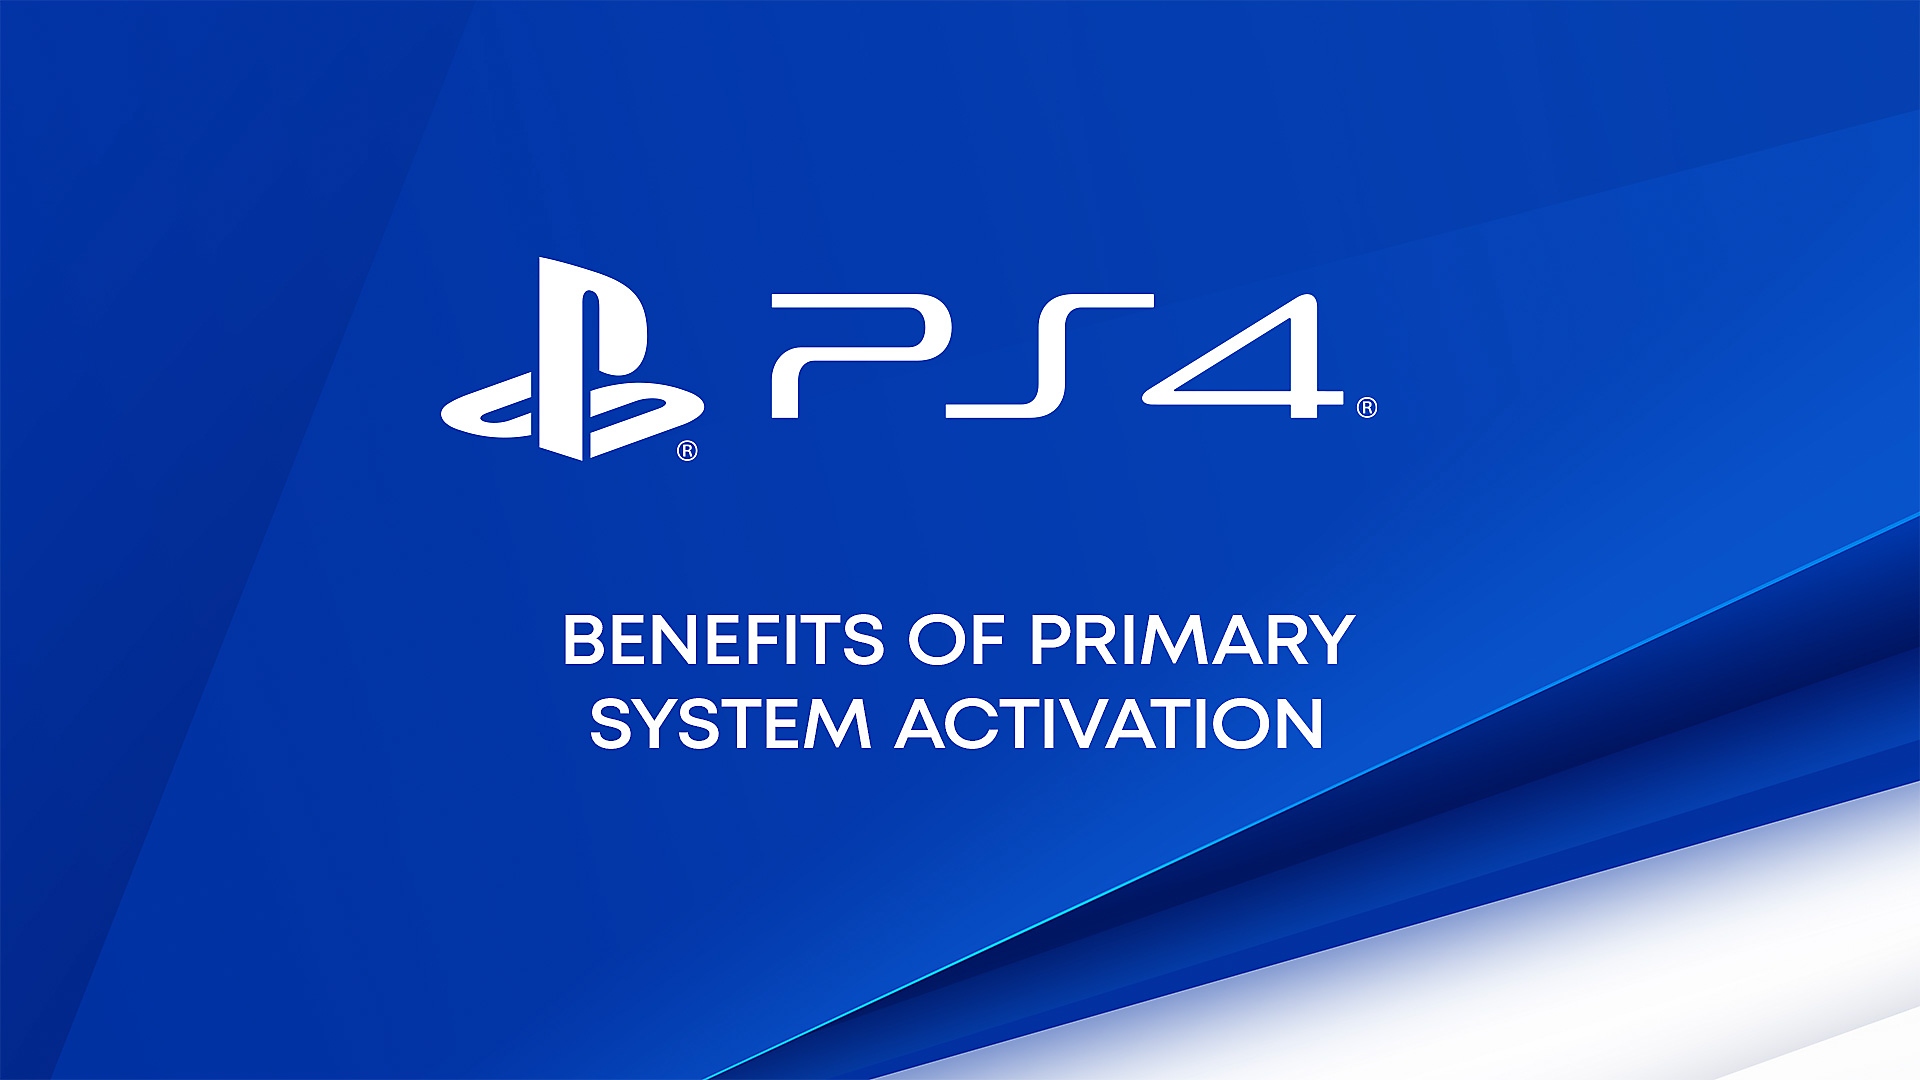 Video of primary PS4 activation benefits